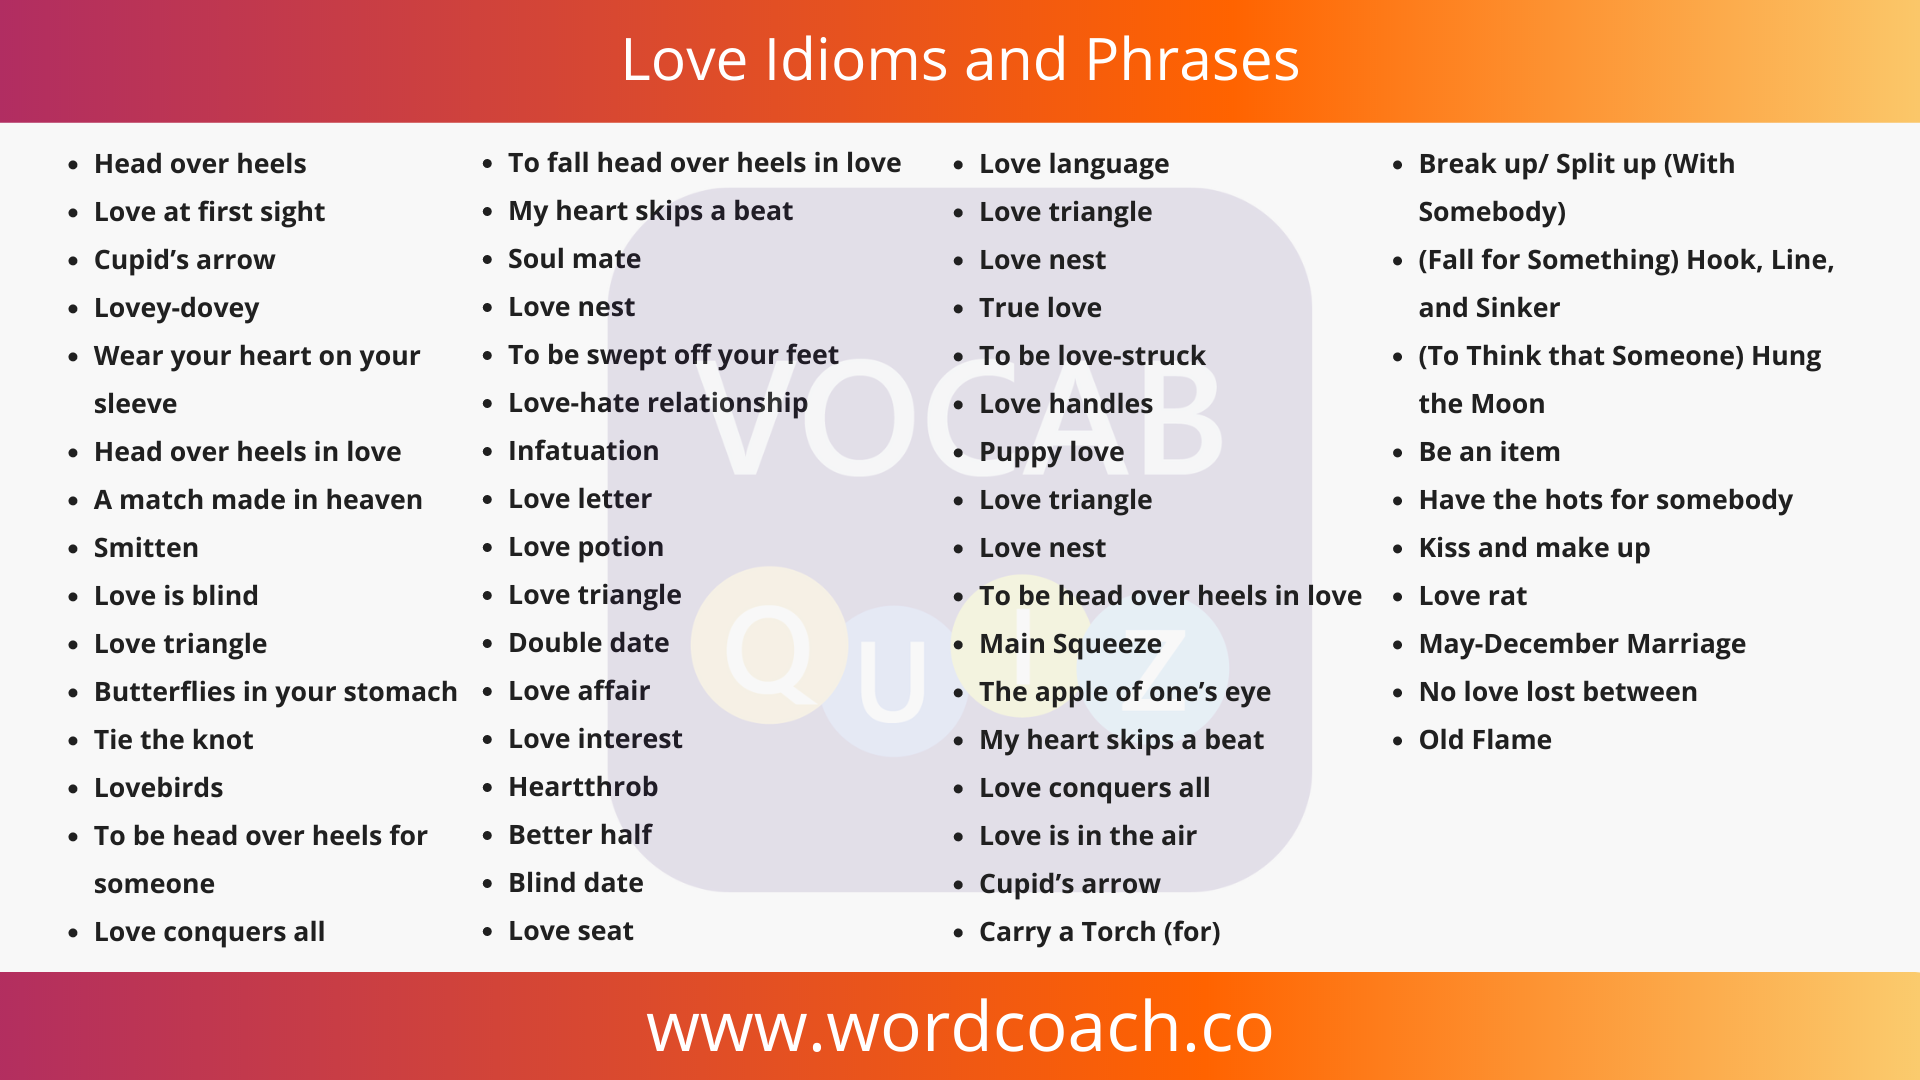 Love Idioms and Phrases - wordcoach.co